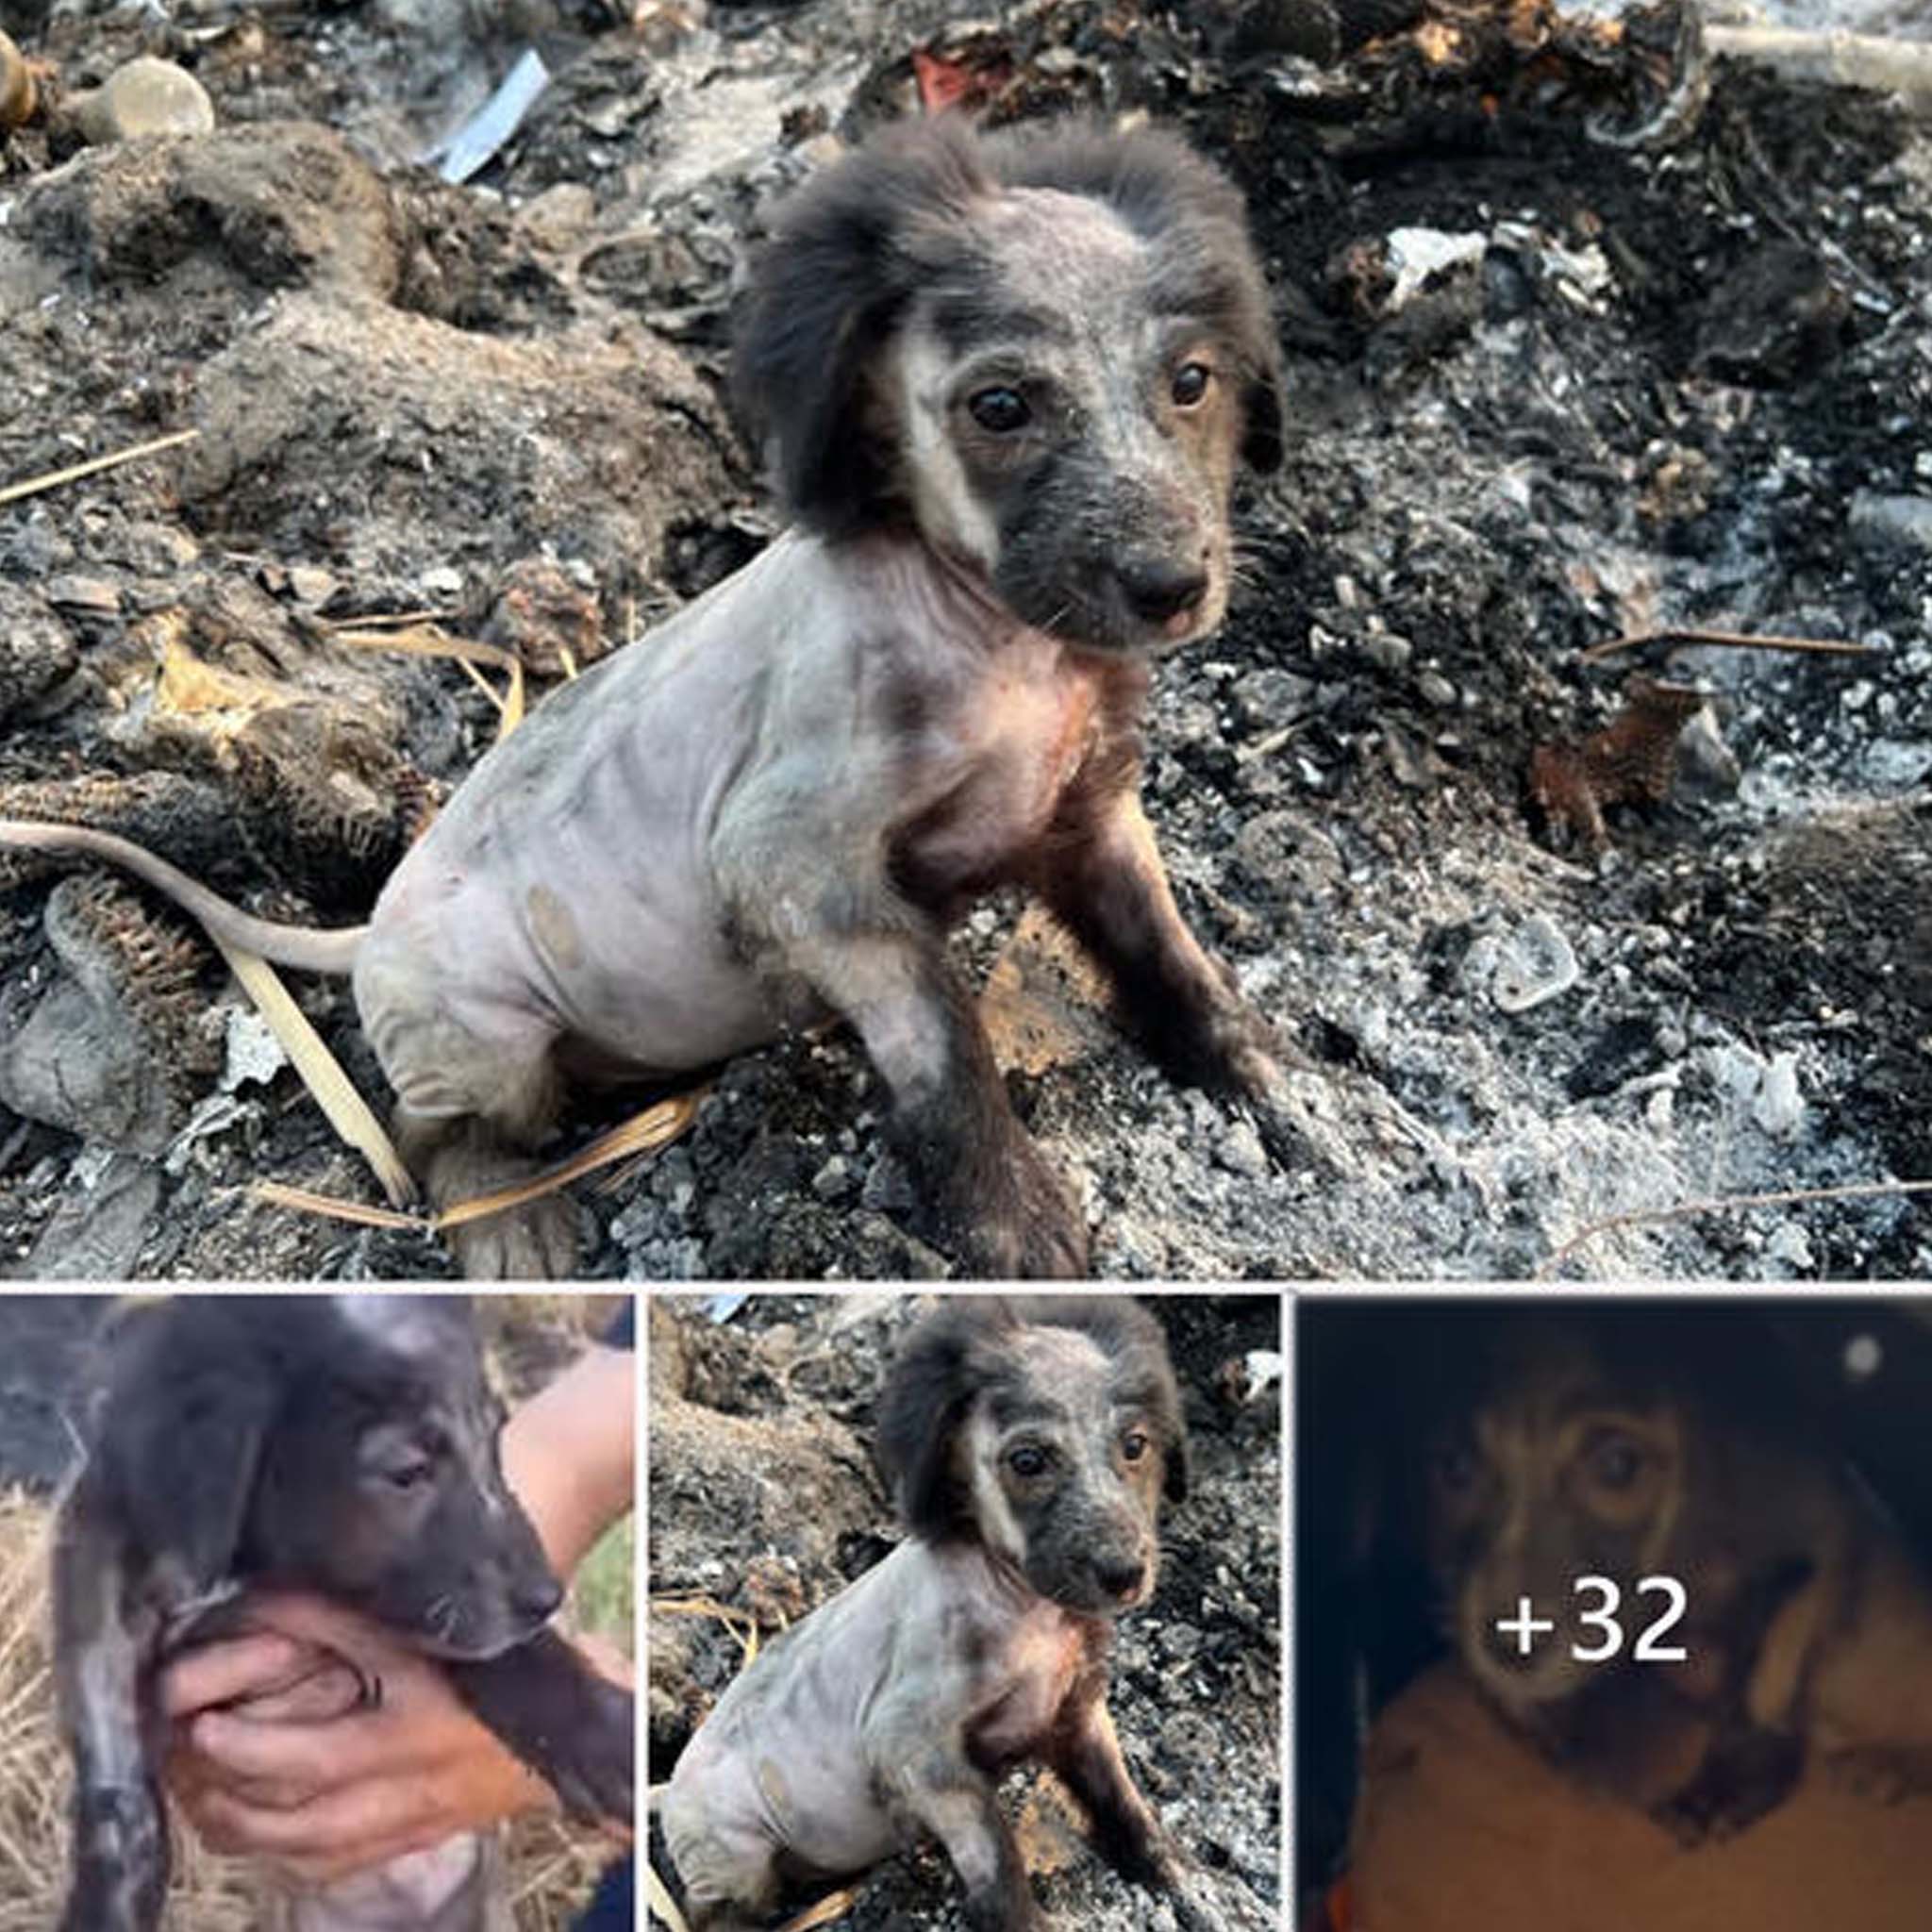 The unforgettable story of a resilient dog abandoned in a landfill, his fur burned to pieces, overcoming his fear and fighting to regain his life